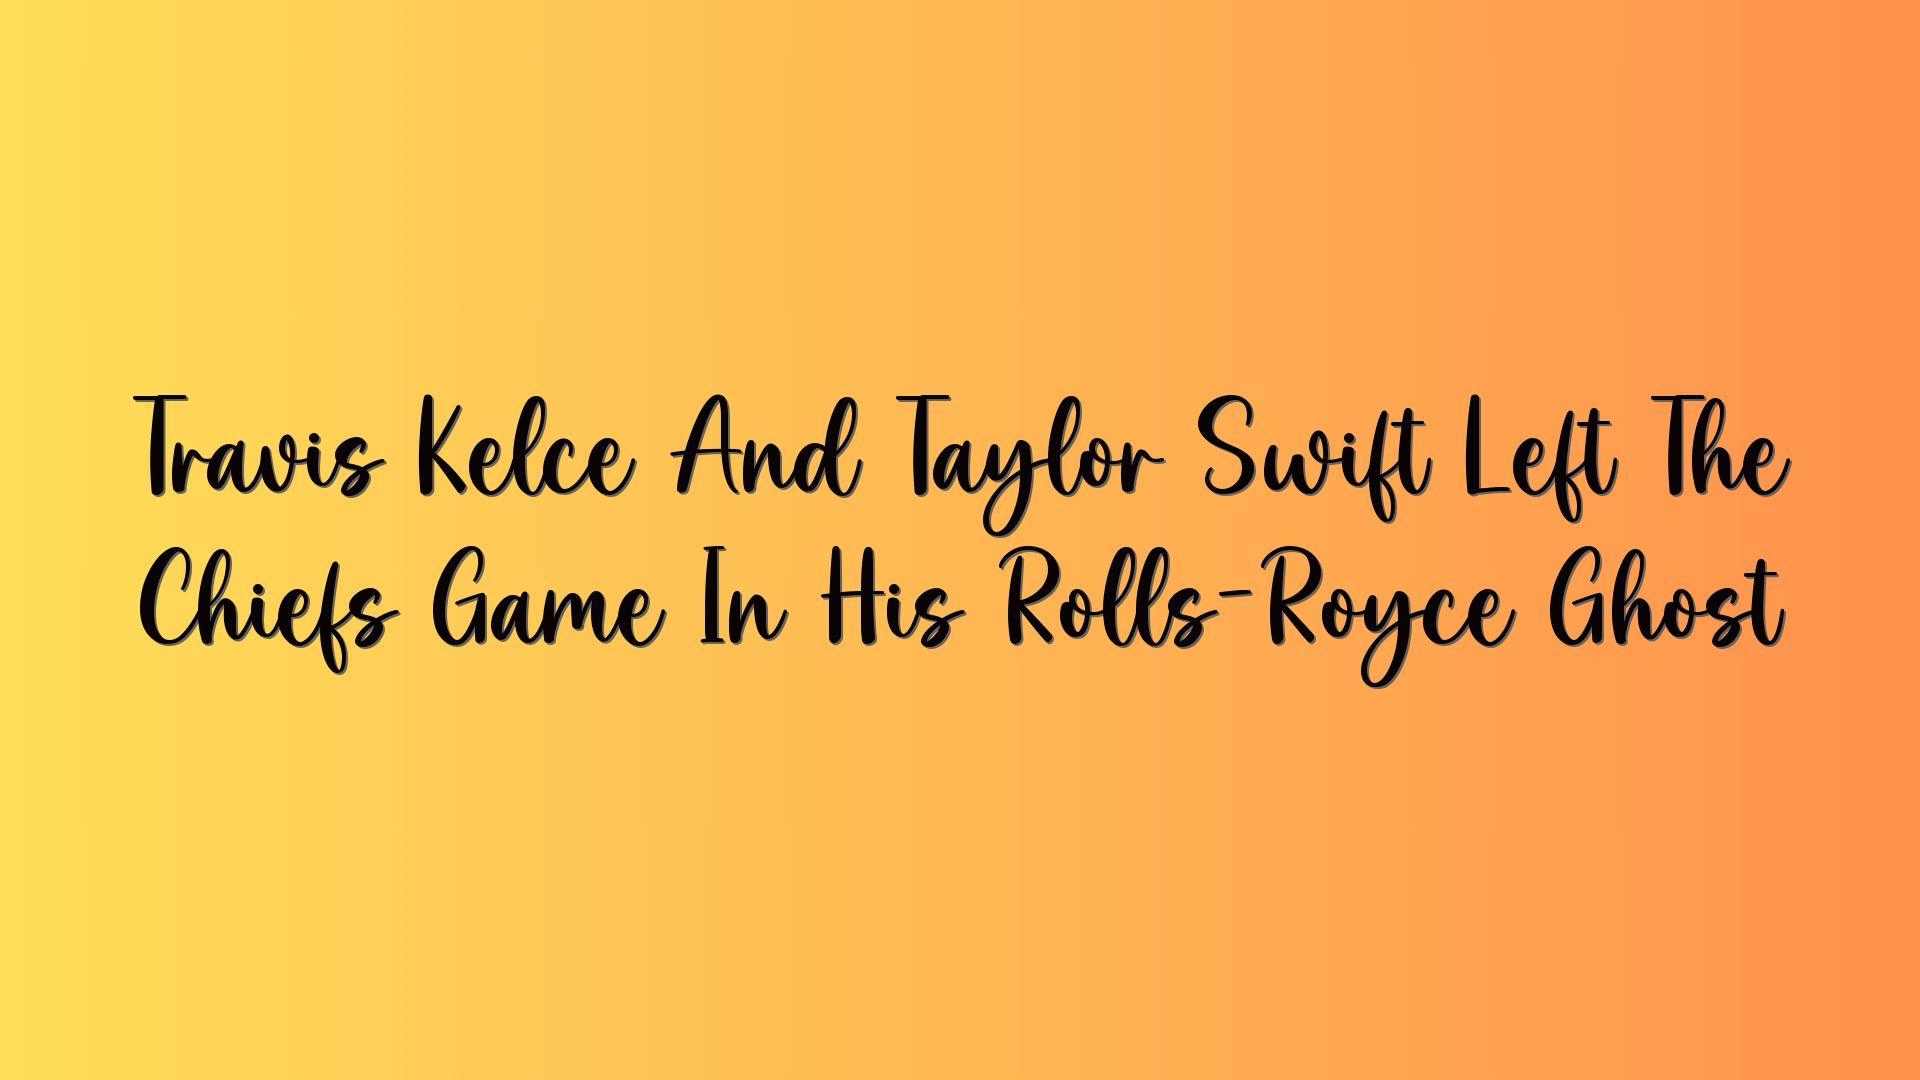 Travis Kelce And Taylor Swift Left The Chiefs Game In His Rolls-Royce Ghost